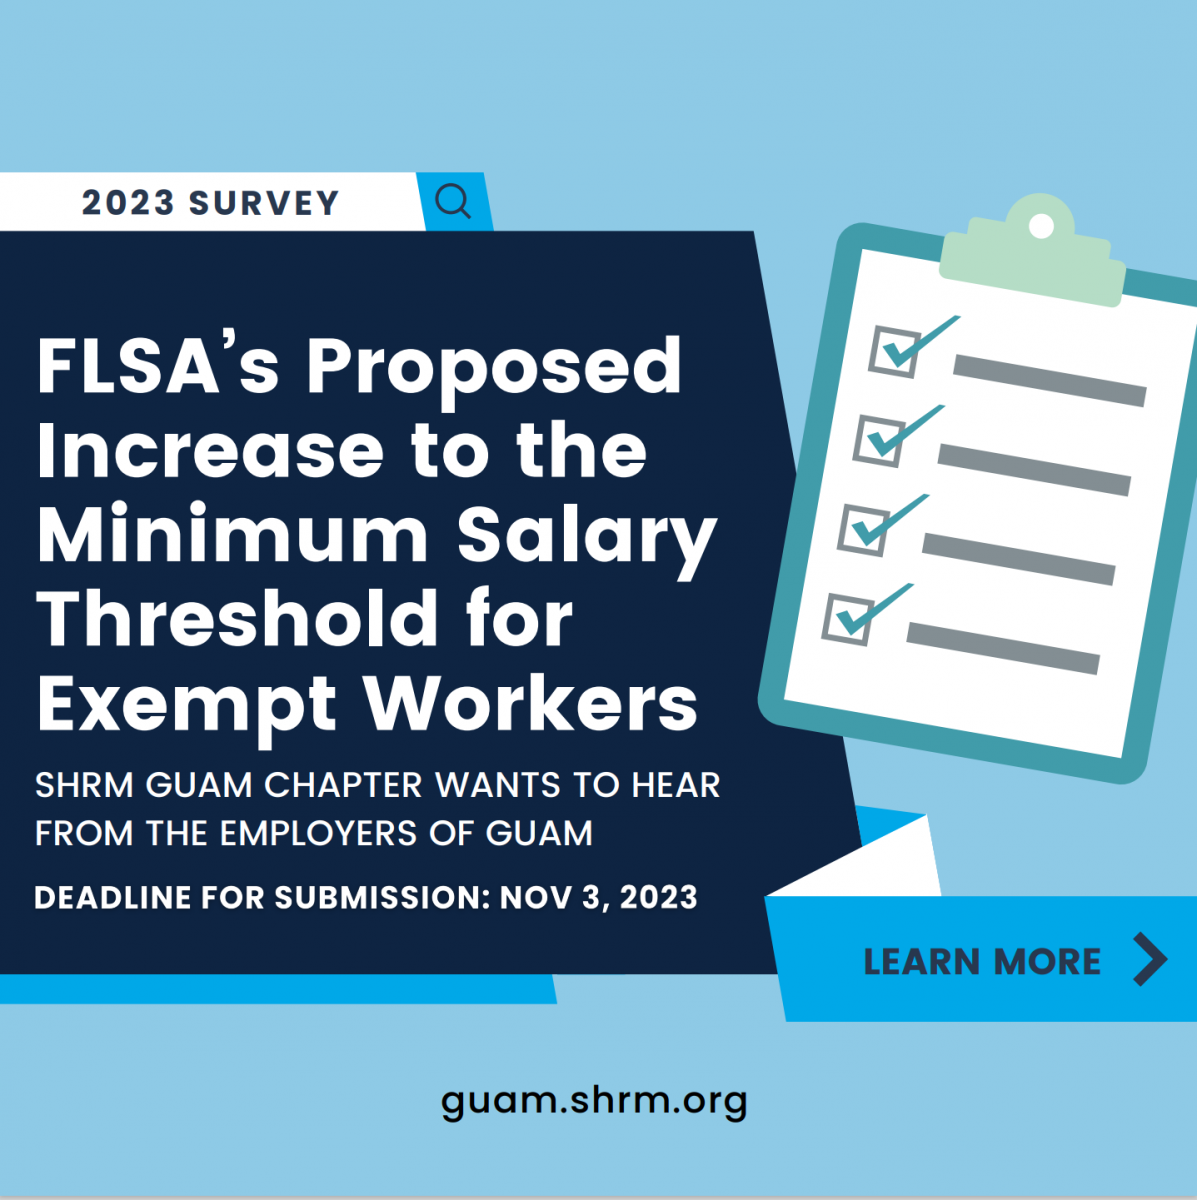 FLSA's Proposed Increase to the Minimum Salary Threshold for Exempt